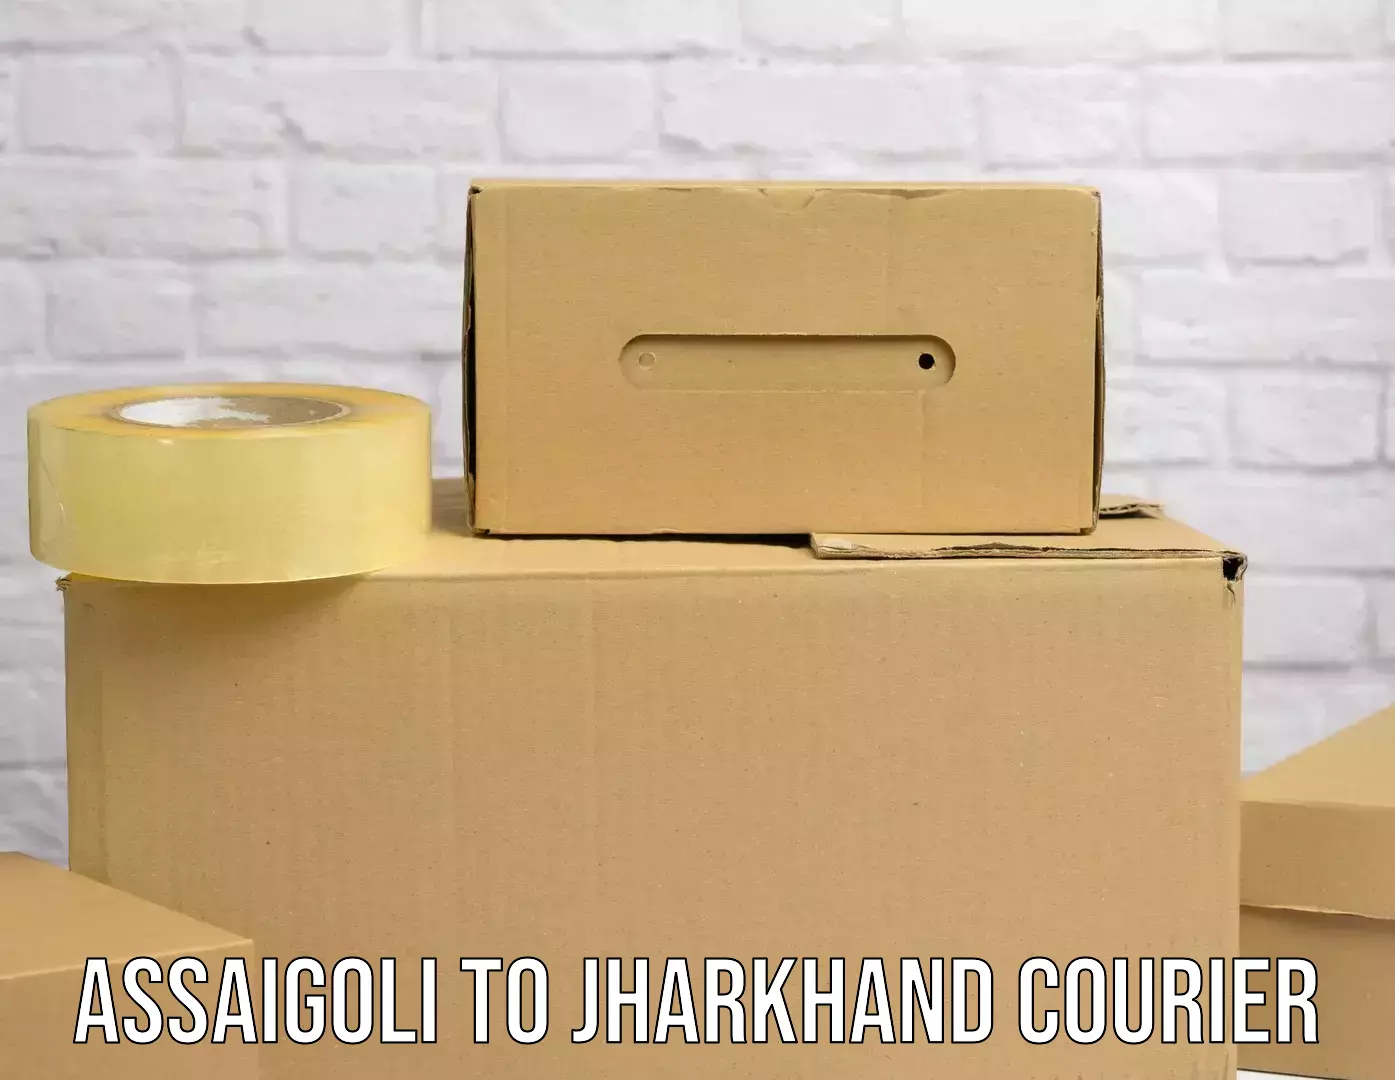 Express package delivery Assaigoli to Jharkhand